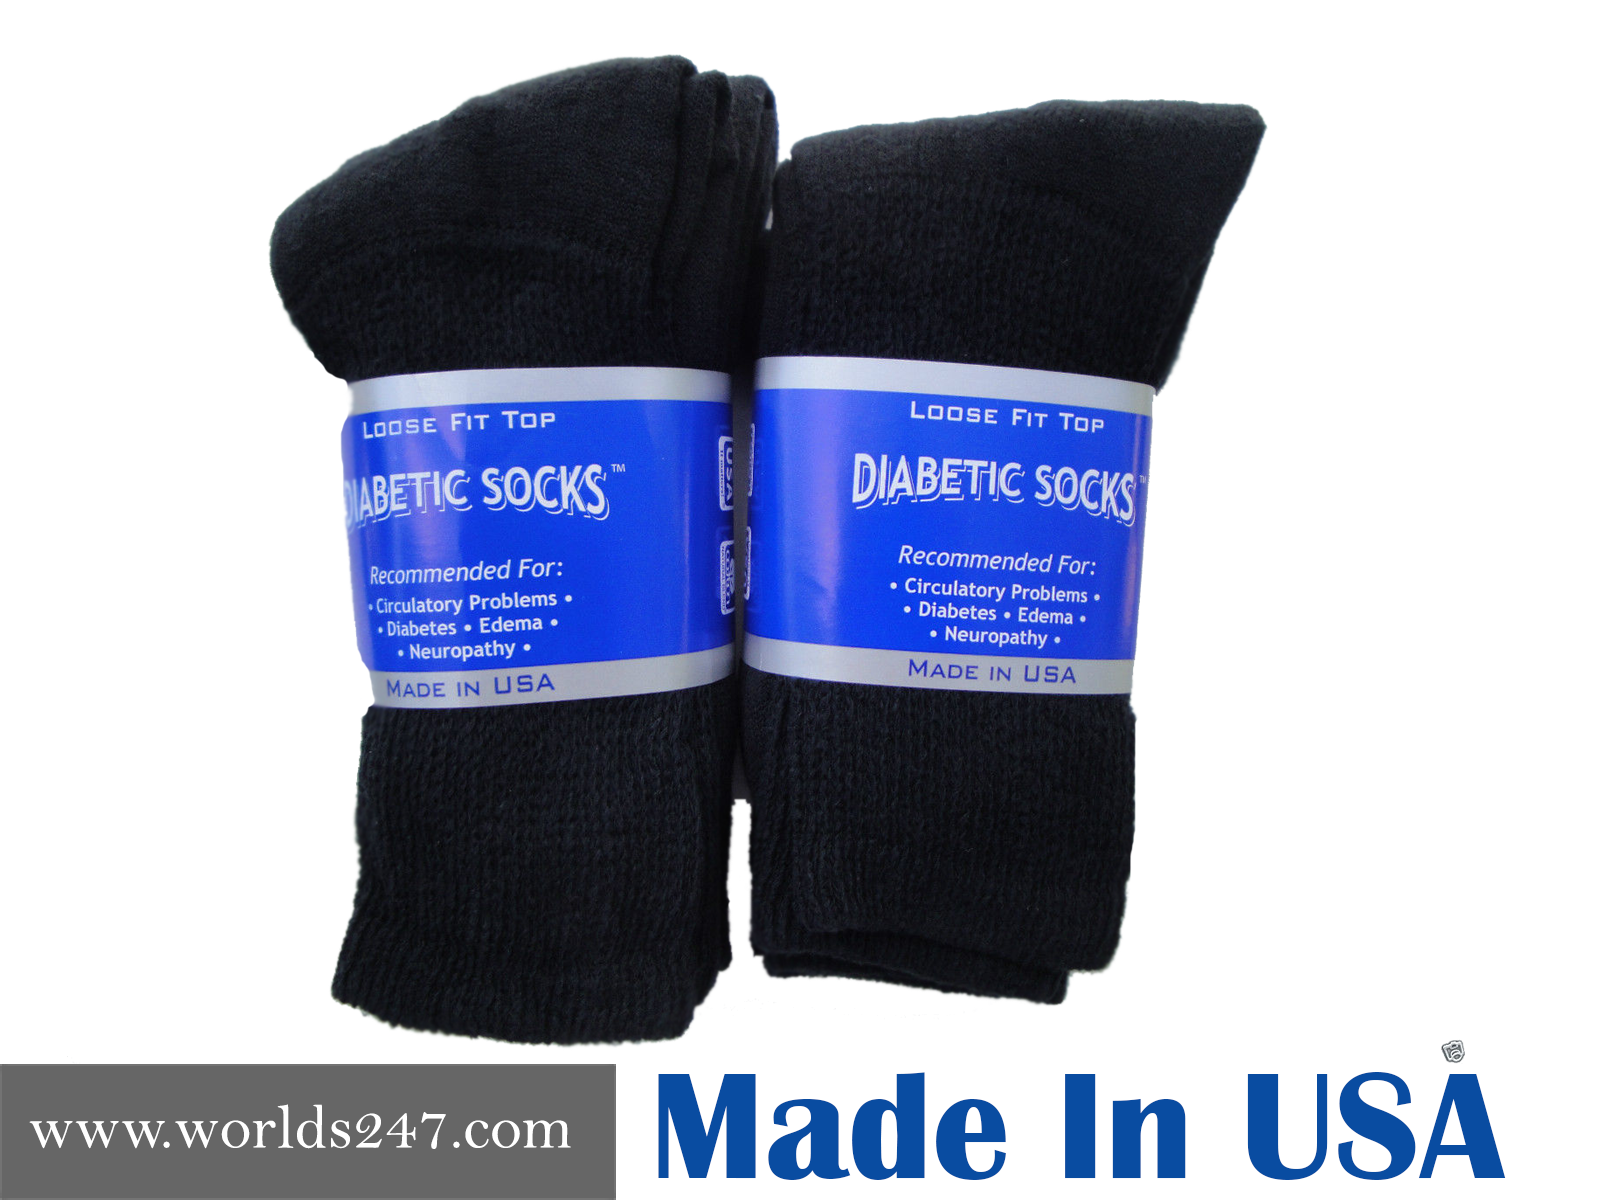 BEST QUALITY CREW DIABETIC SOCKS 6,12,18 PAIR MADE IN USA SIZE 9-11,10-13 &13-15 Physician's Choice - фотография #9